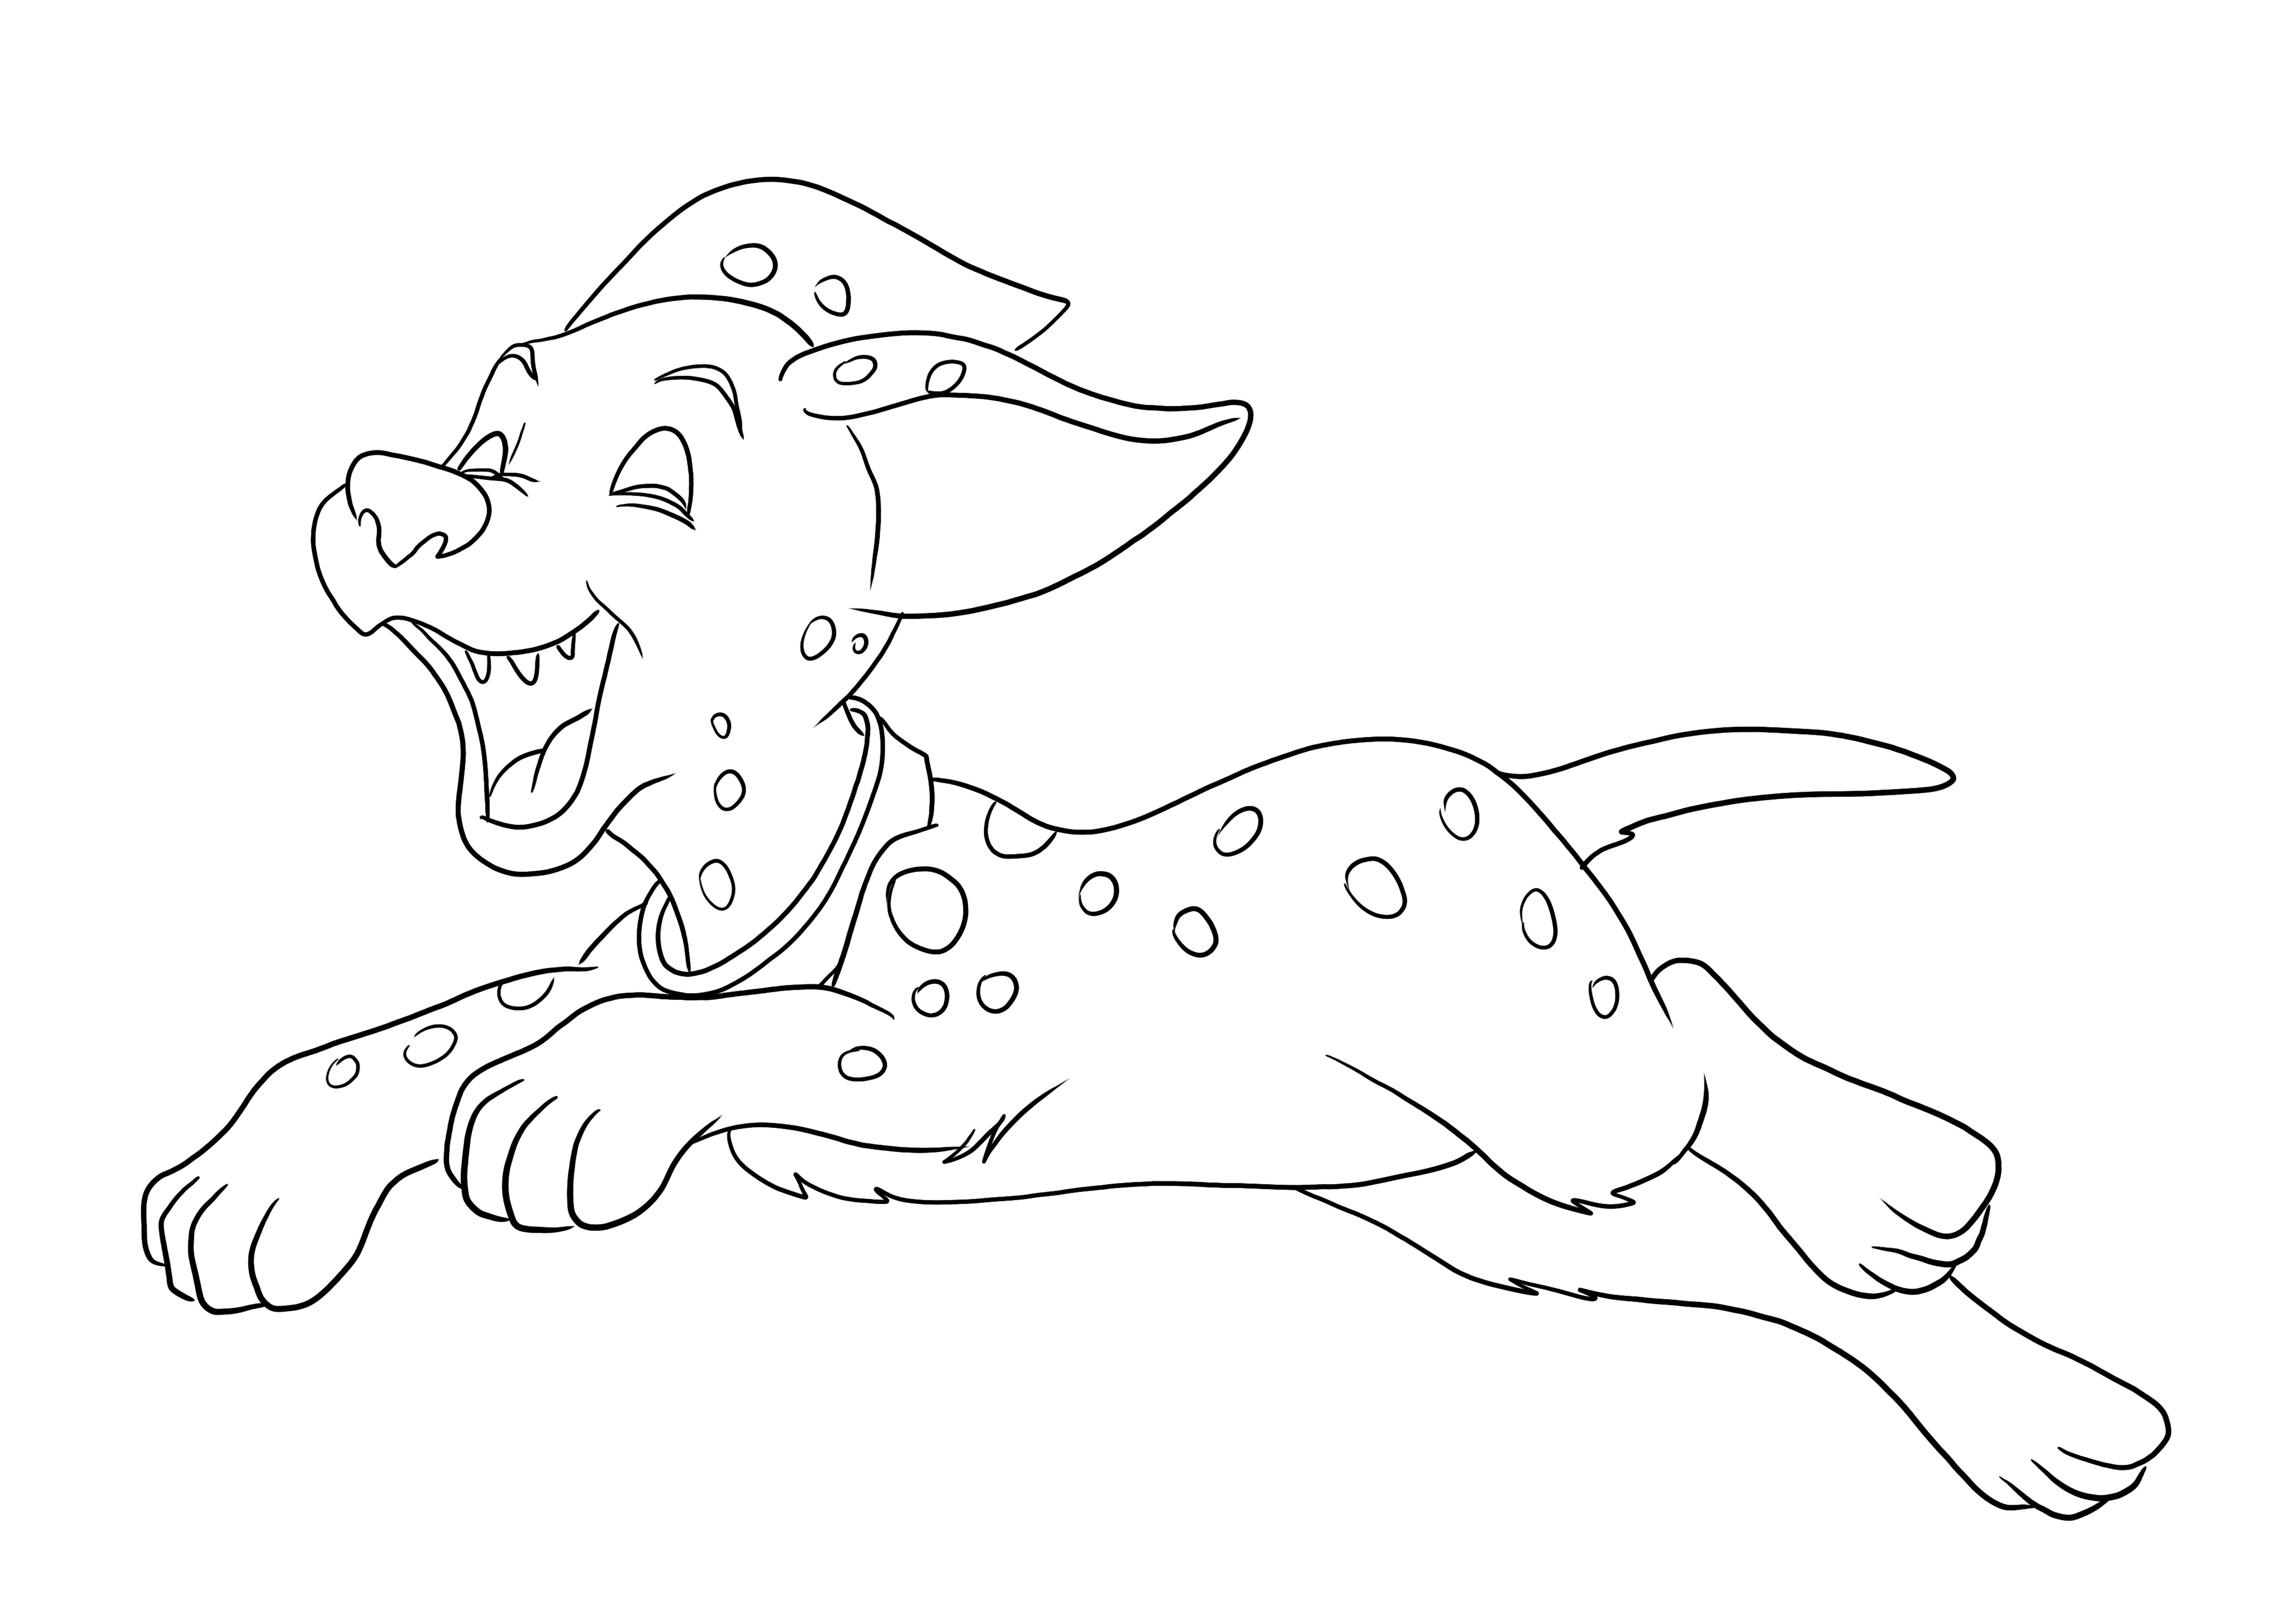 Happy Dotty Dalmatian puppy easy coloring sheet free to download